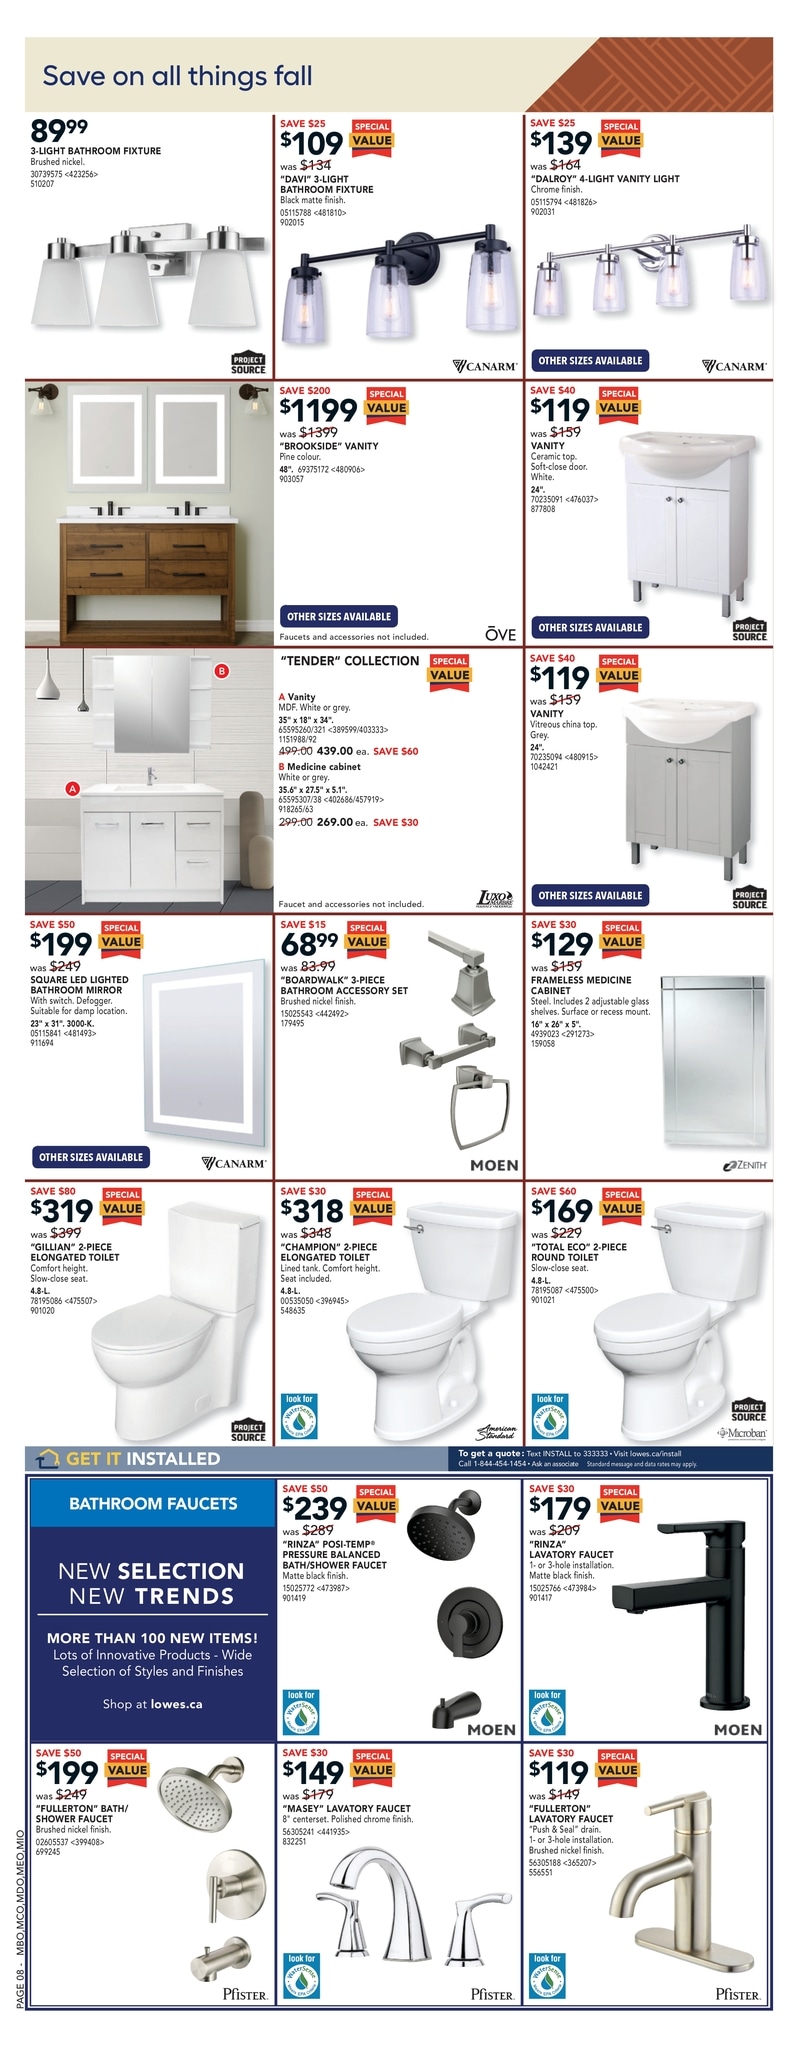 Lowe's - Weekly Flyer Specials - Page 9